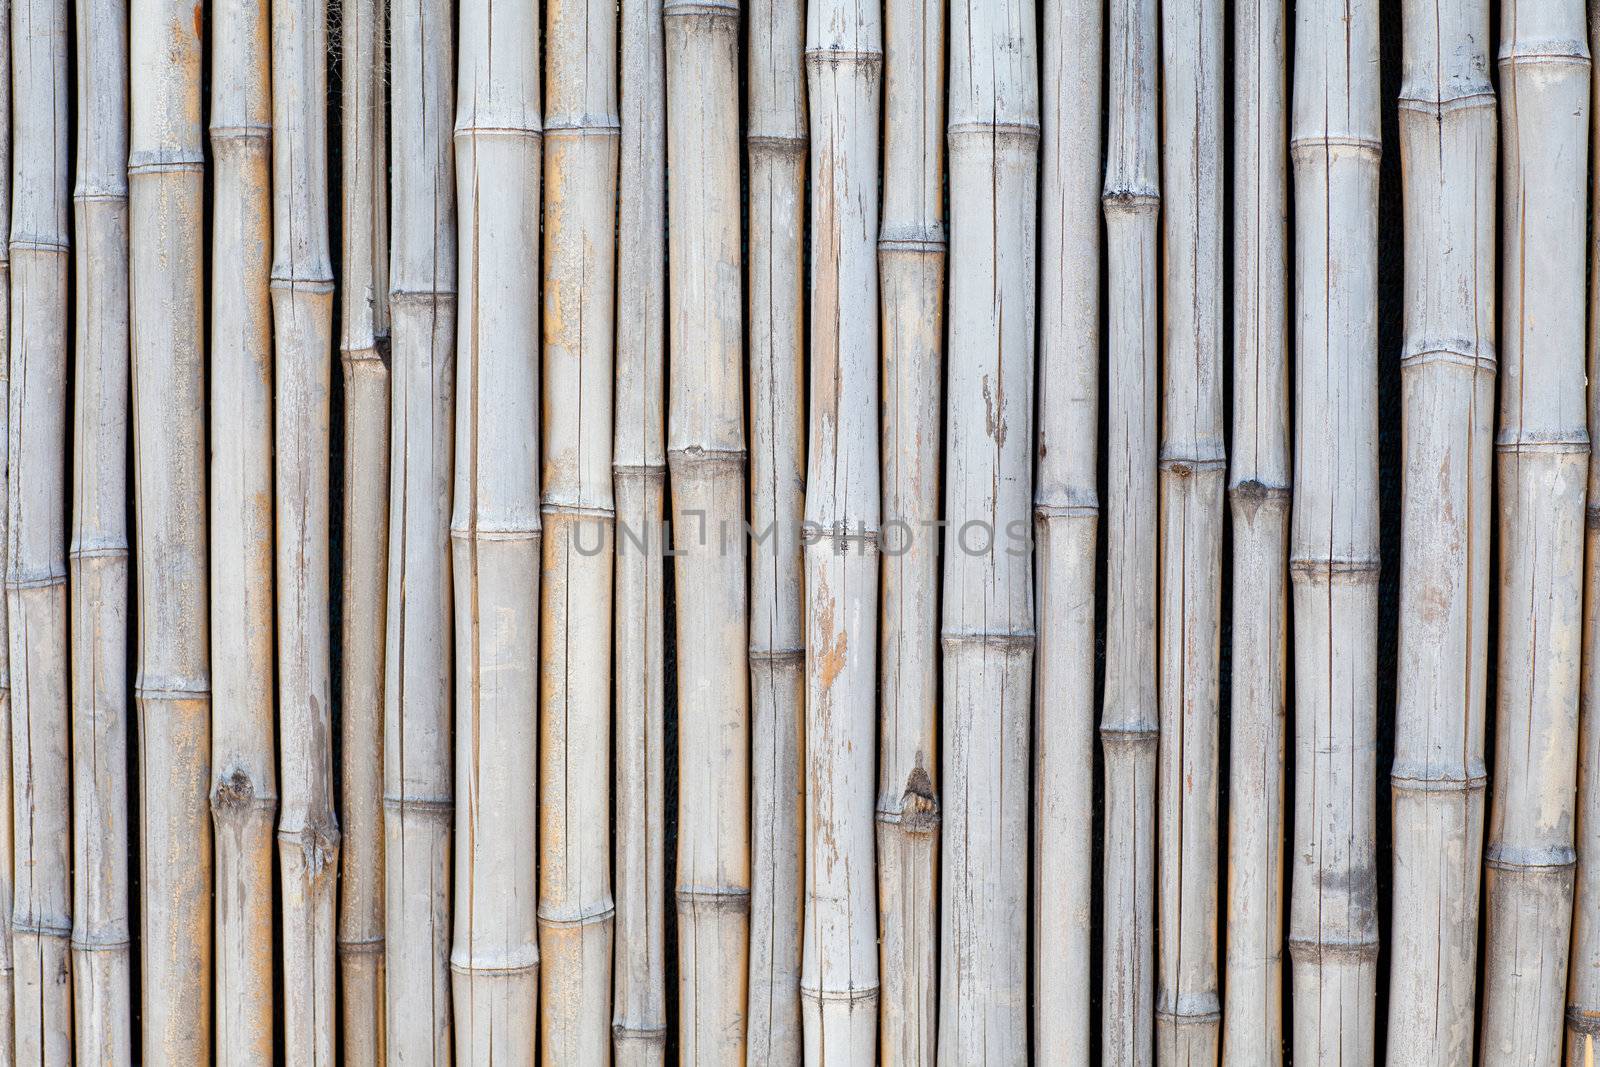 background of bamboo by vsurkov